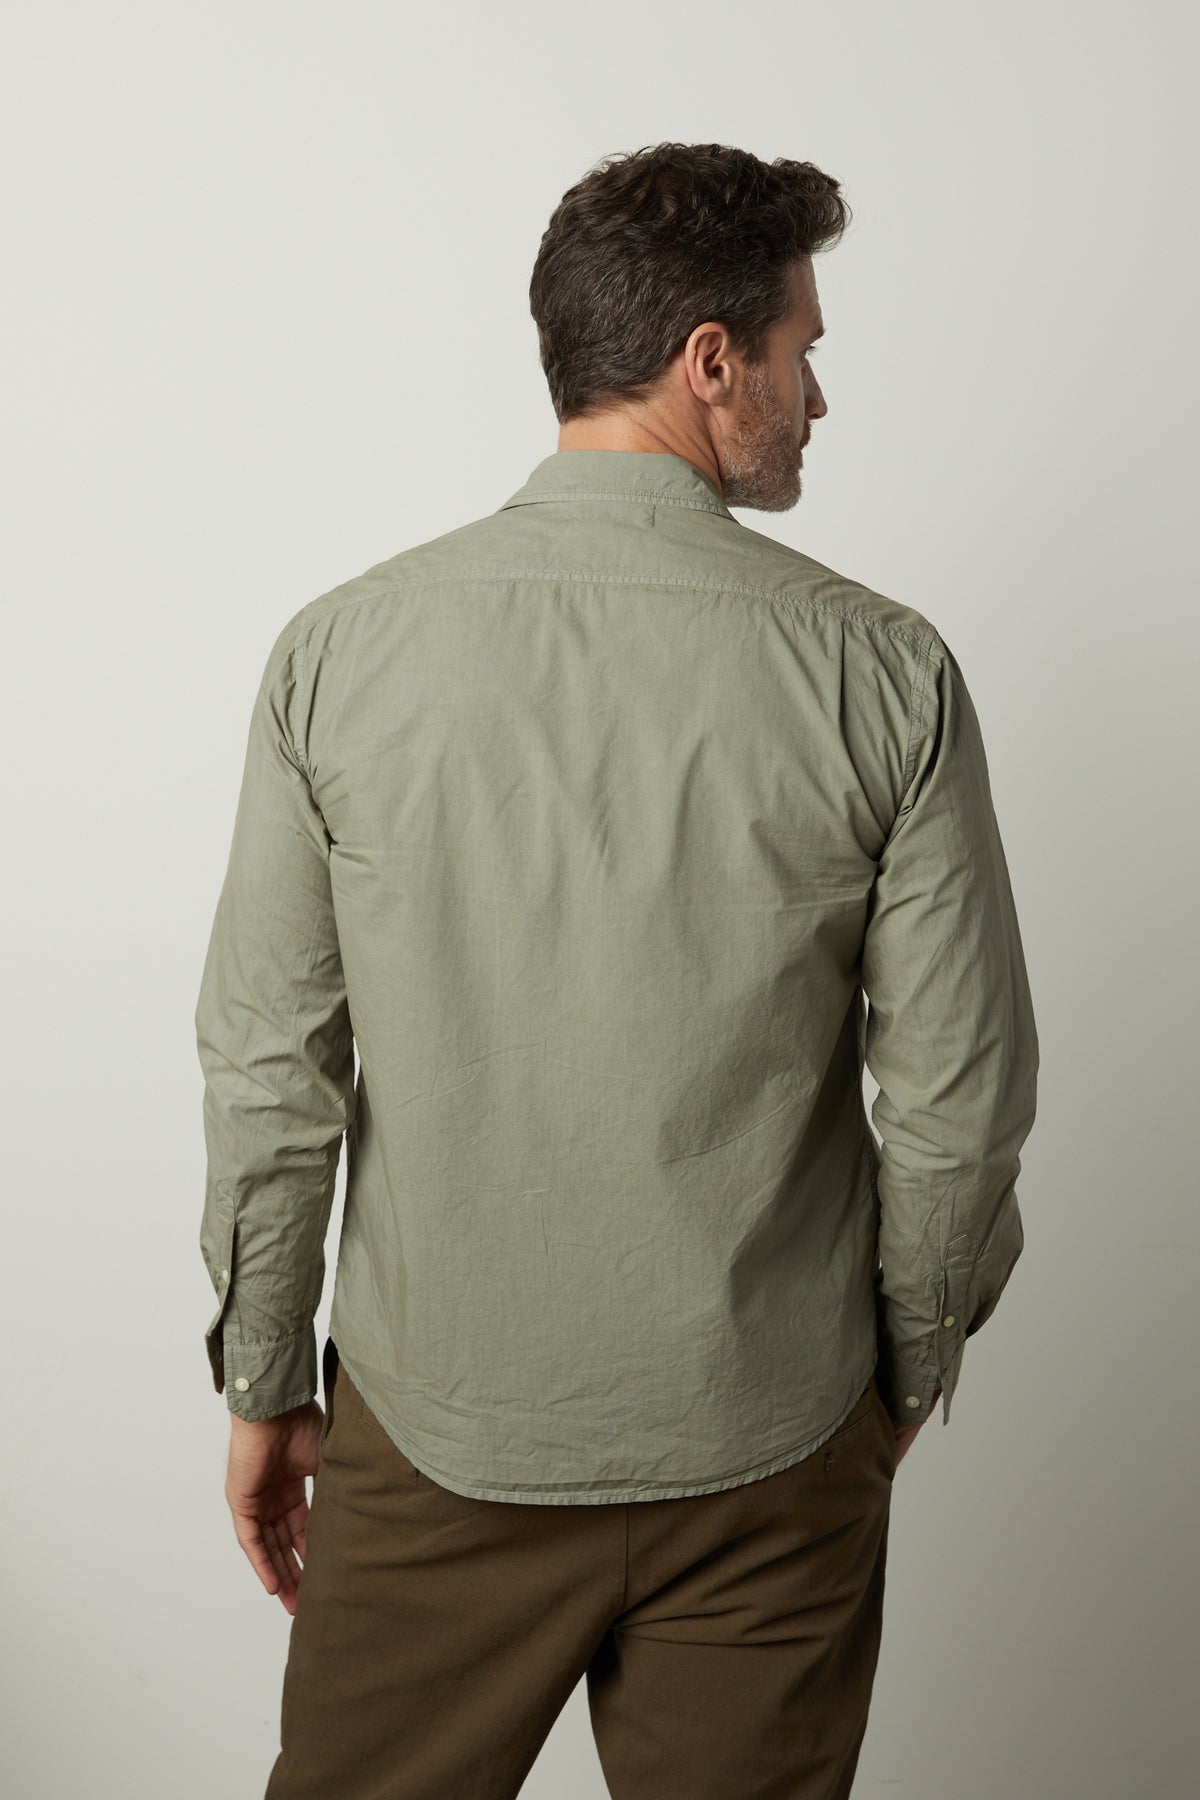 The back view of a man wearing a Velvet by Graham & Spencer BROOKS BUTTON-UP SHIRT and khaki pants.-35782370296001